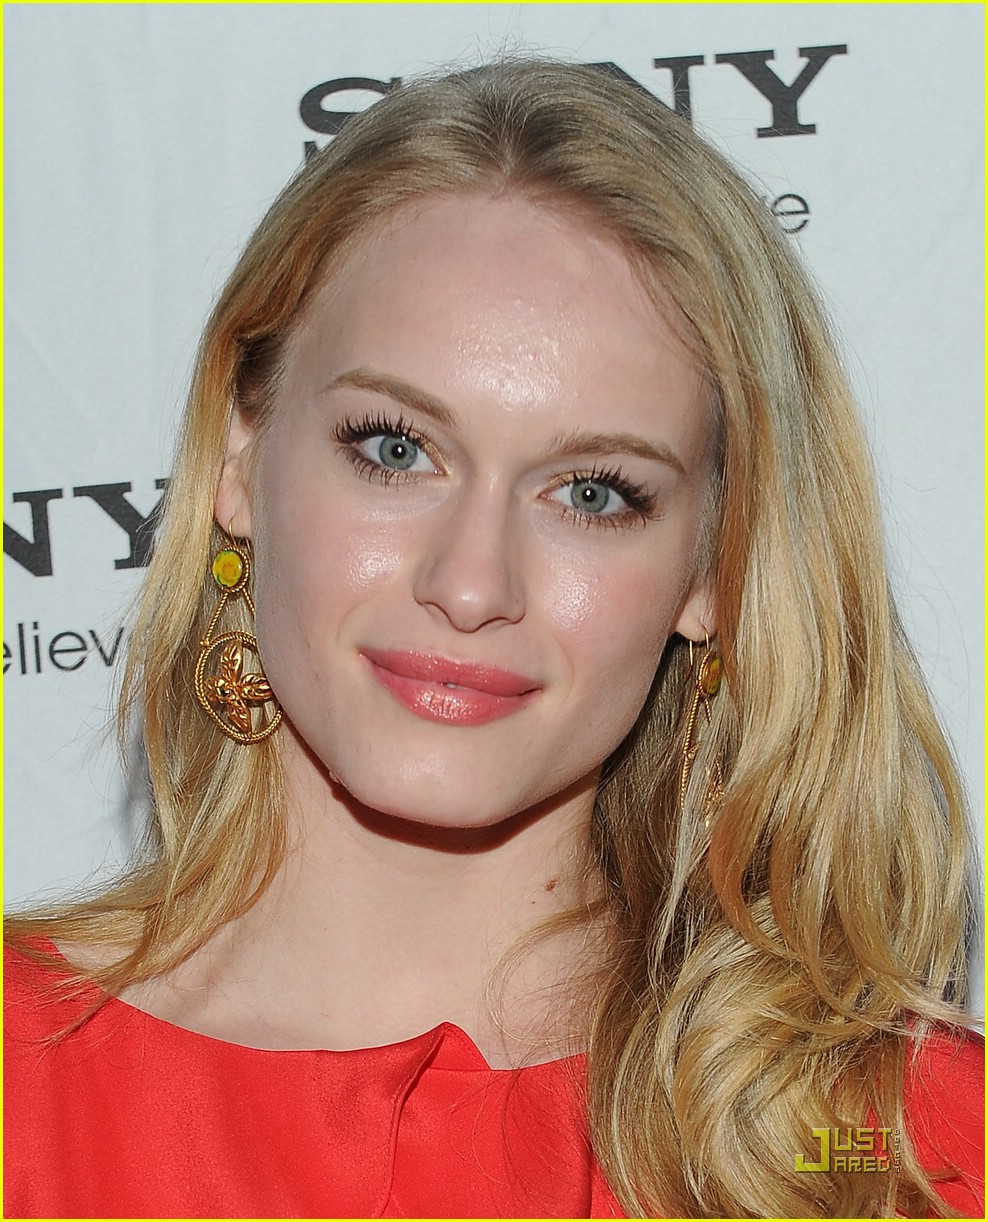 Leven Rambin The Hunger Games Glimmer Photo Photo Gallery